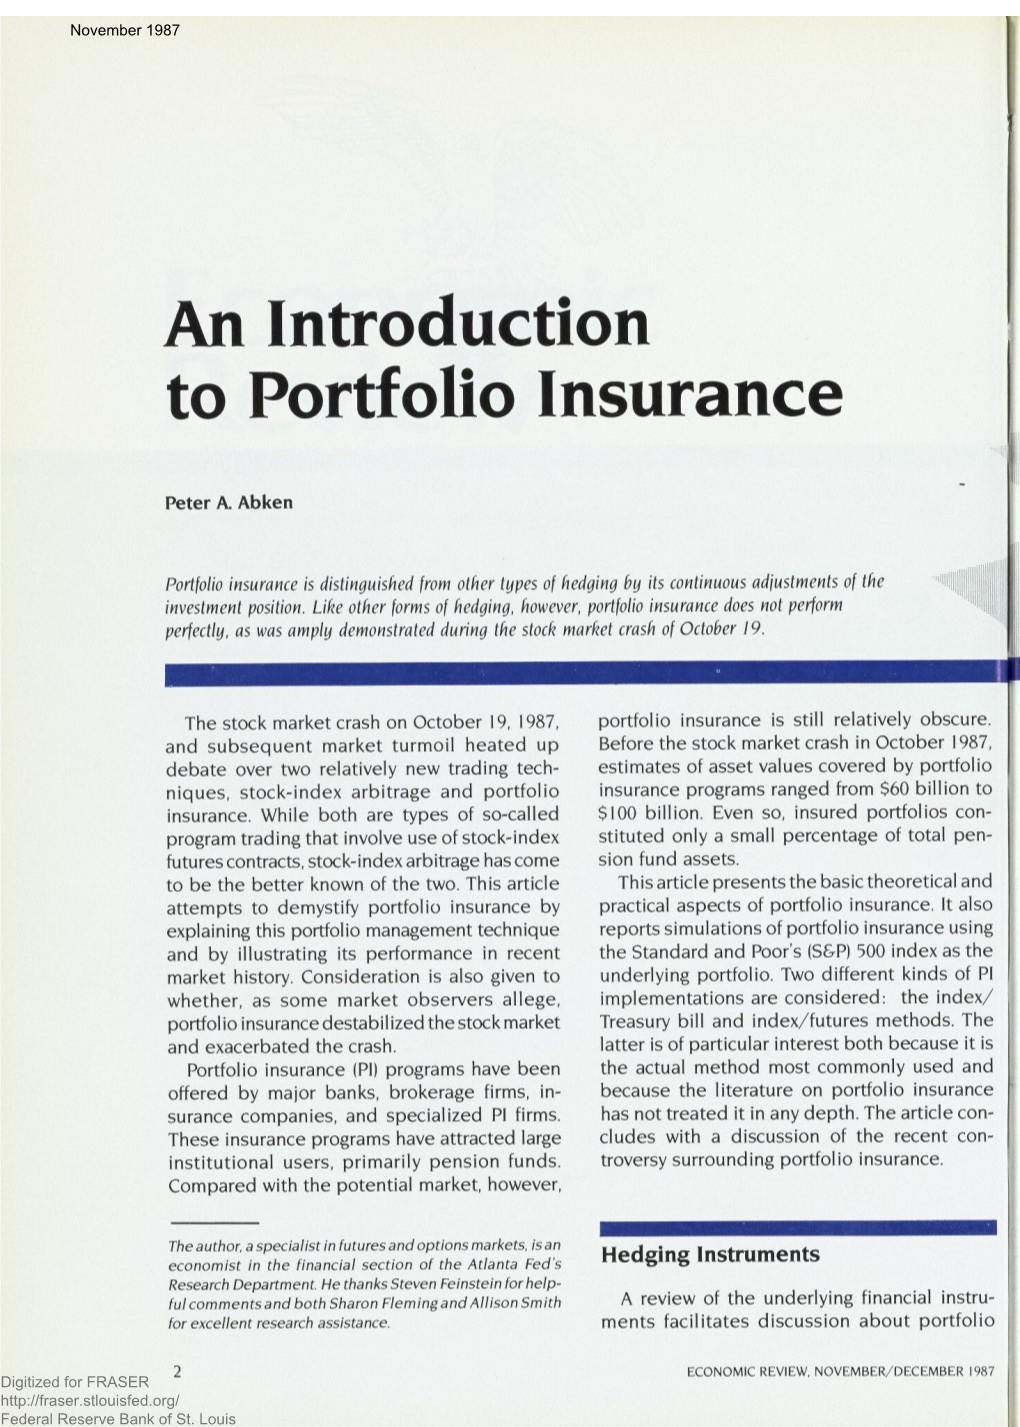 An Introduction to Portfolio Insurance